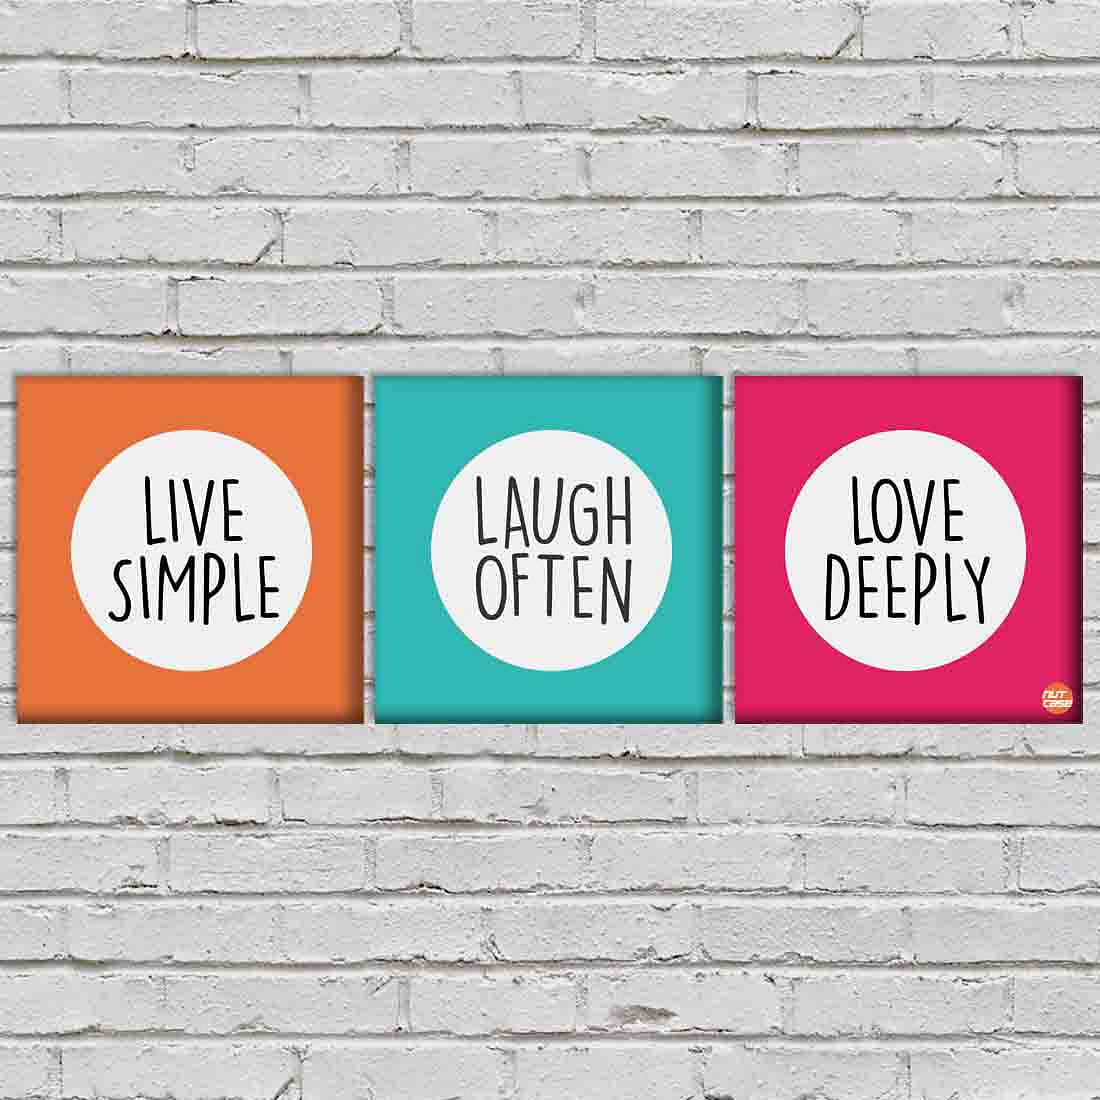 Wall Art Decor Hanging Panels Set Of 3 -Live Simple Laugh Often Love Deeply Nutcase